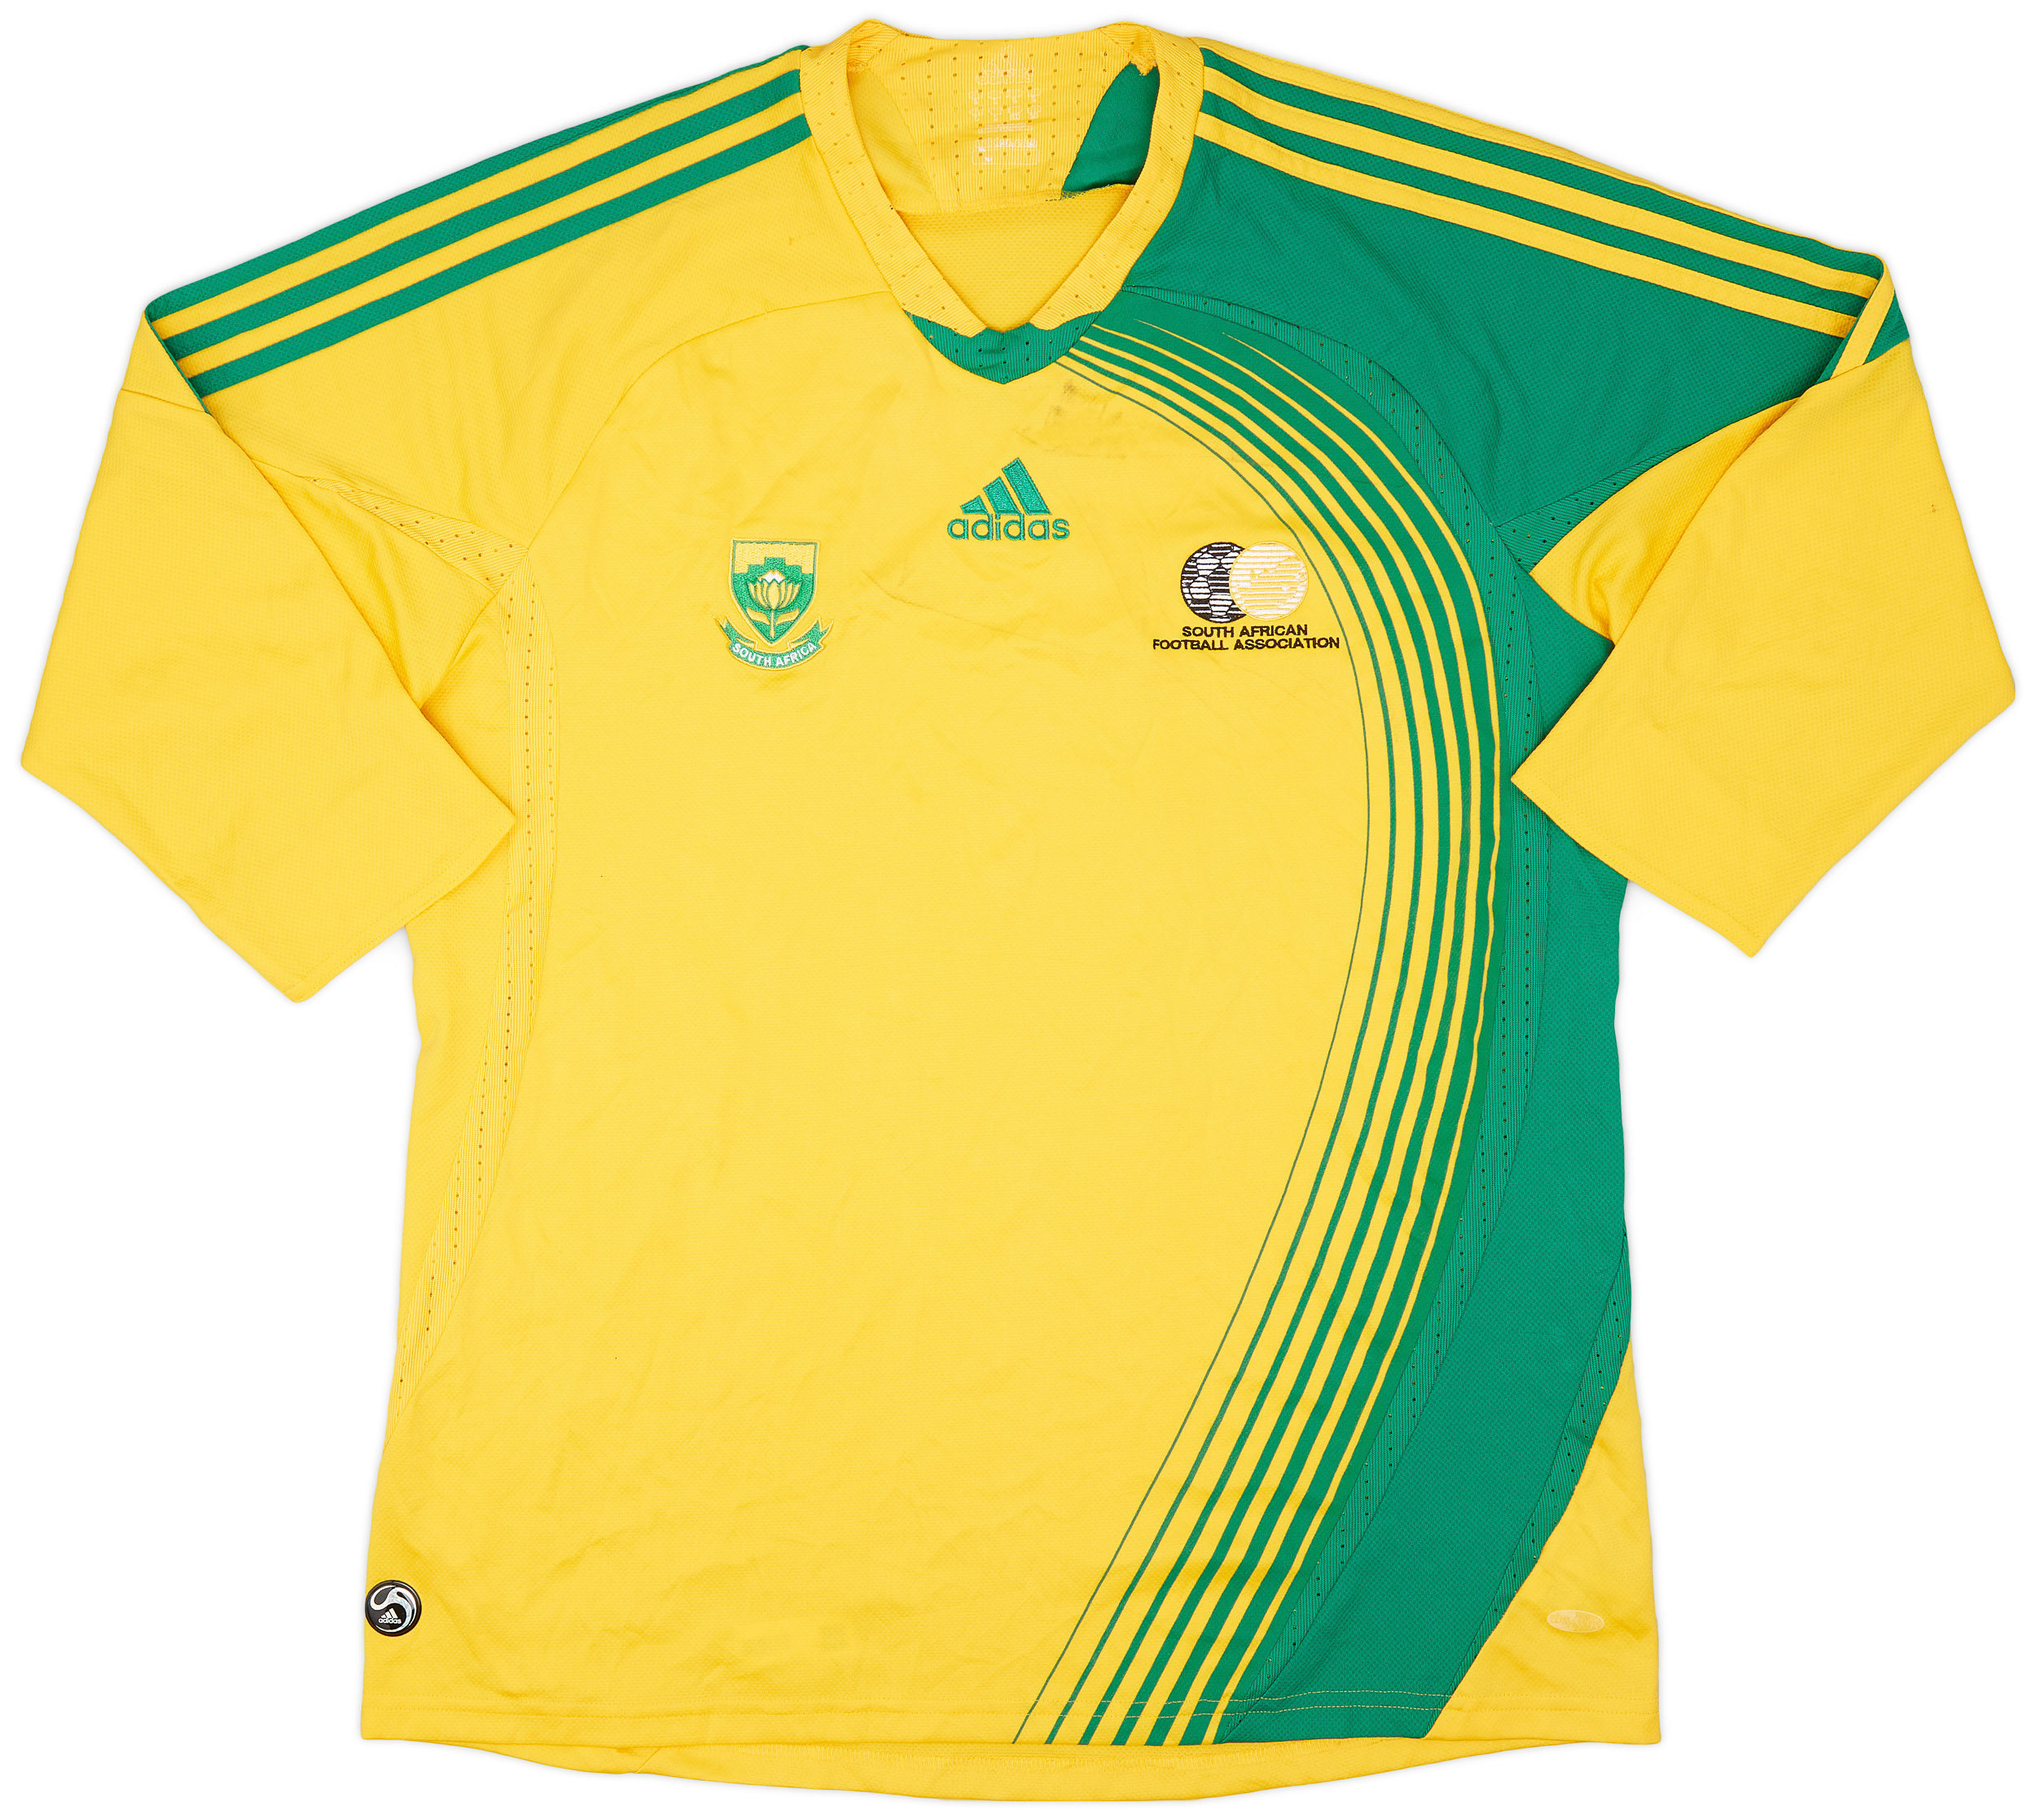 2009-10 South Africa Home Shirt - 6/10 - ()